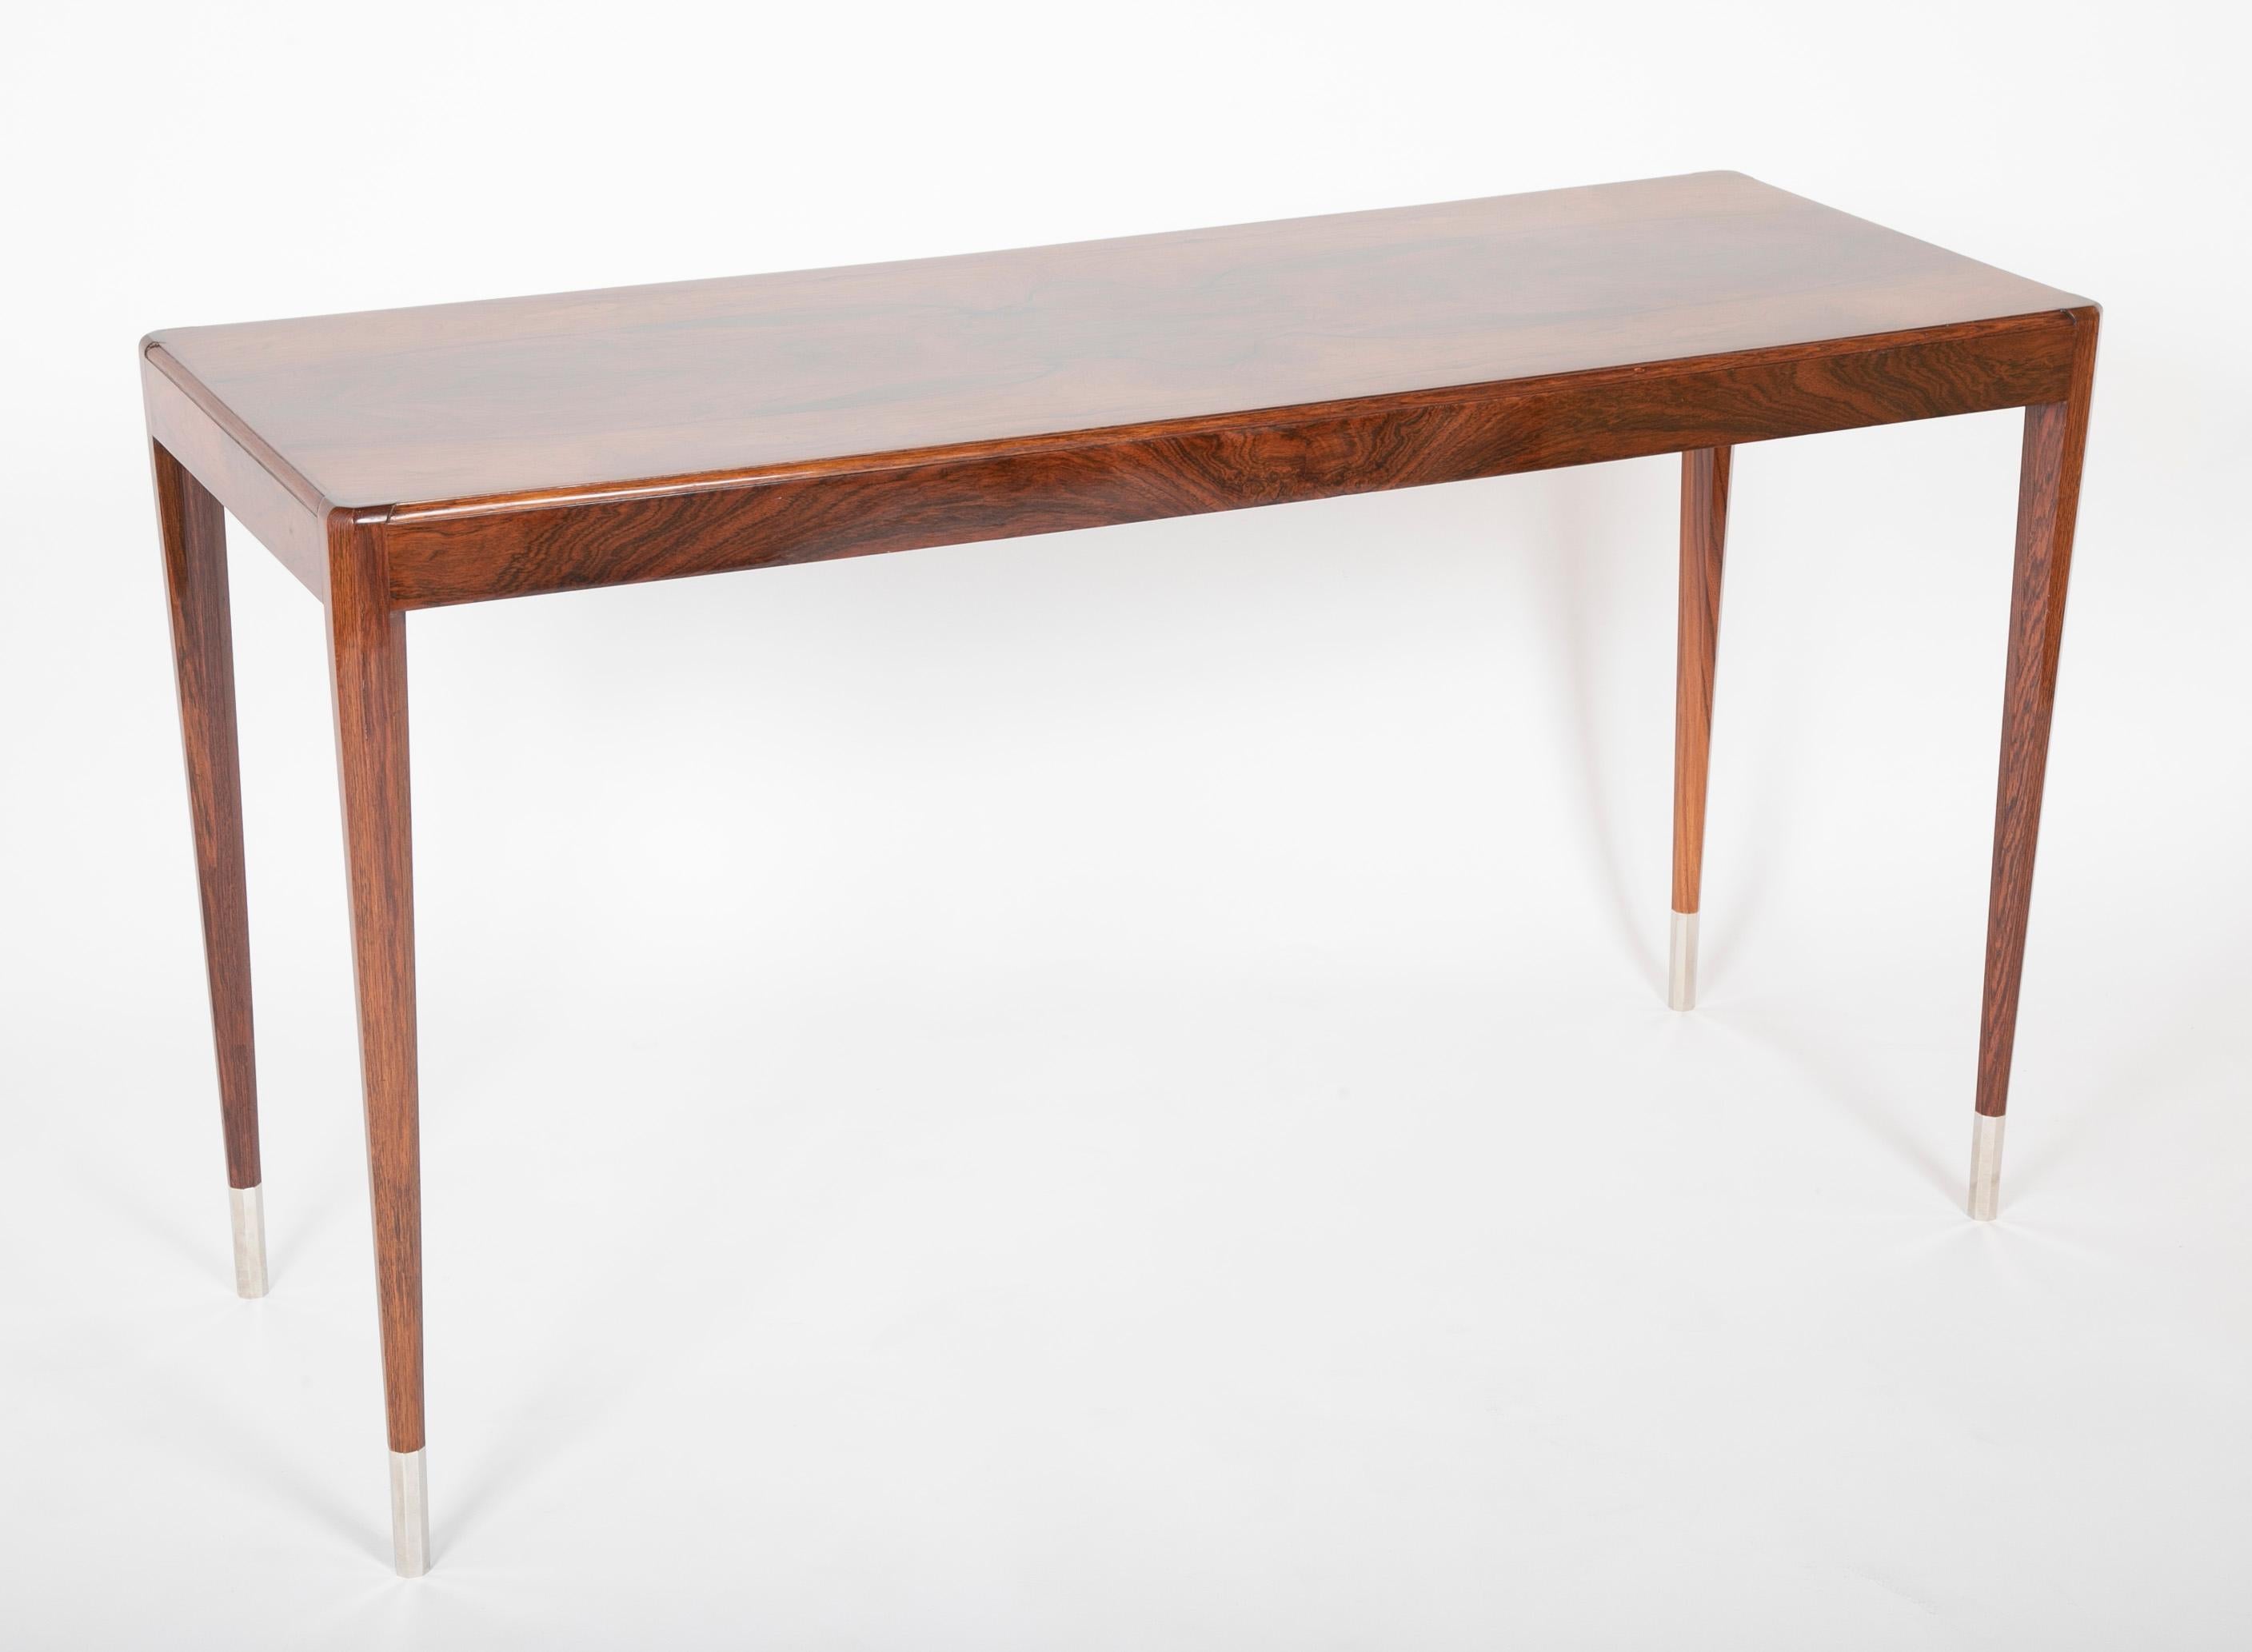 Custom hall table in rosewood on tapered legs to chrome sabots by Dominique, France.  Circa 1930's.